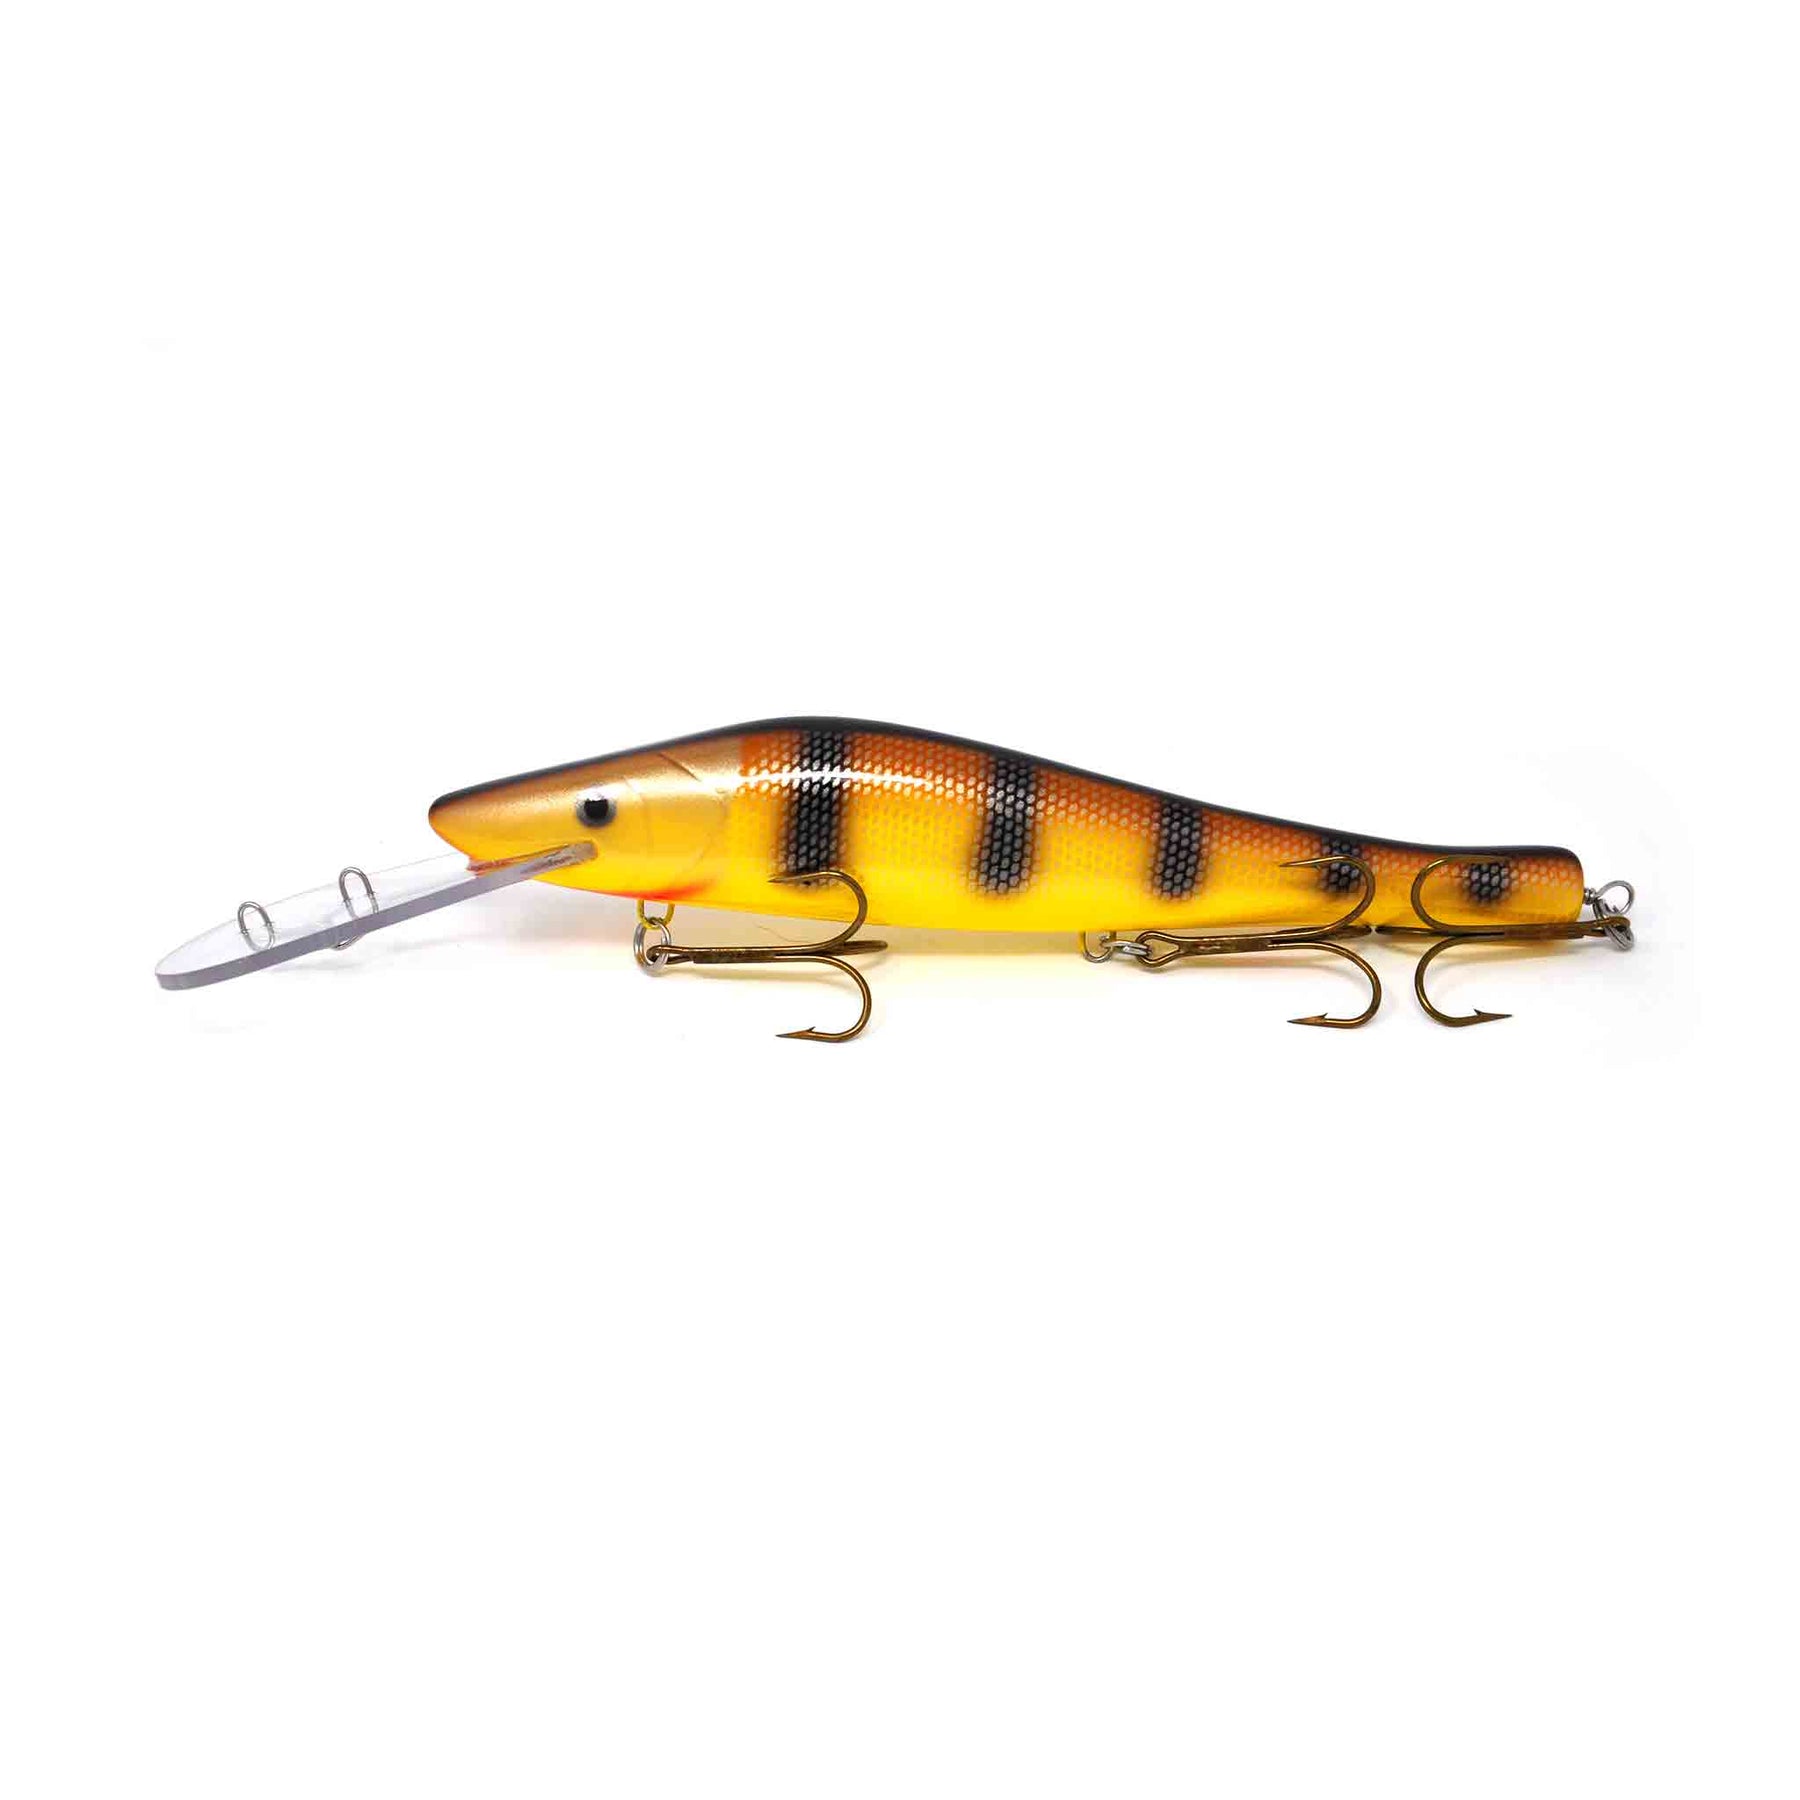 View of Crankbaits Legend lures The Plow Crankbait Walleye available at EZOKO Pike and Musky Shop